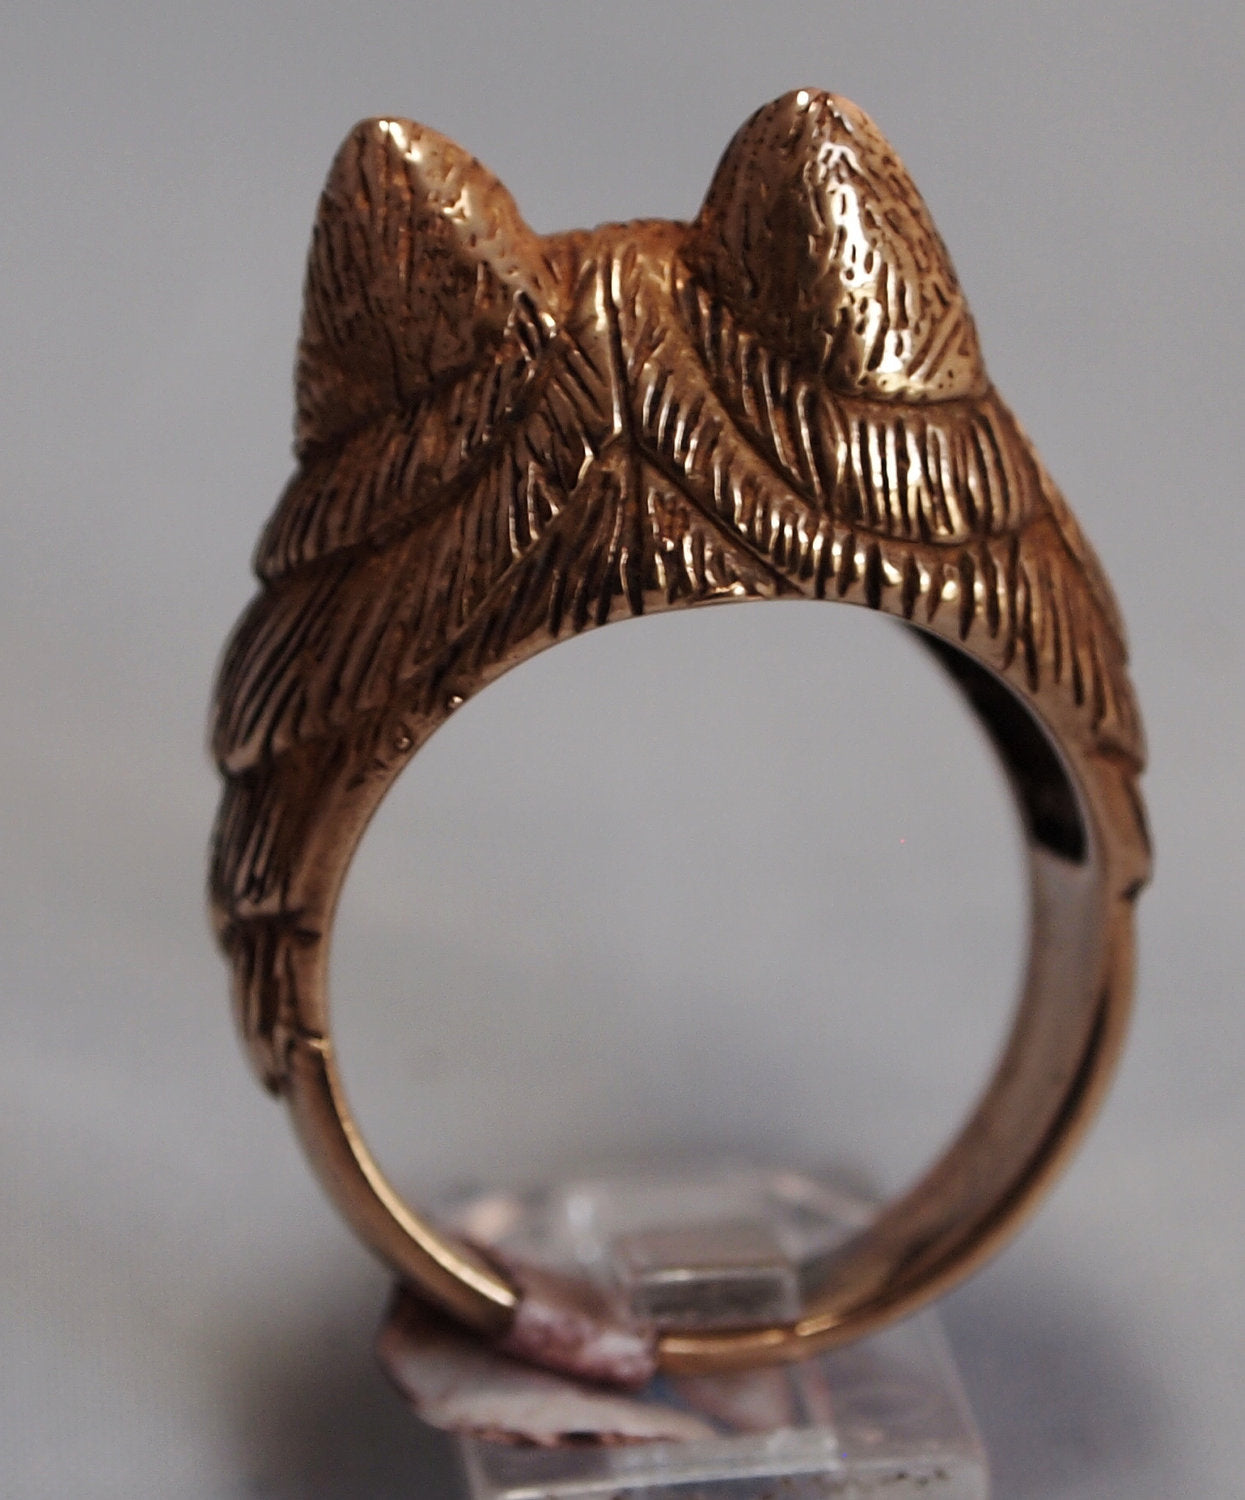 Wolf Ring in Antique Bronze, Bronze Wolf Ring, Bronze Animal Ring, Bronze Animal Jewelry, Bronze Animal Jewellery, Mens Wolf Ring, Bronze Wolf Jewellery, Bronze Wolf Jewelry, 3D Wolf Ring, Animal Lover Ring